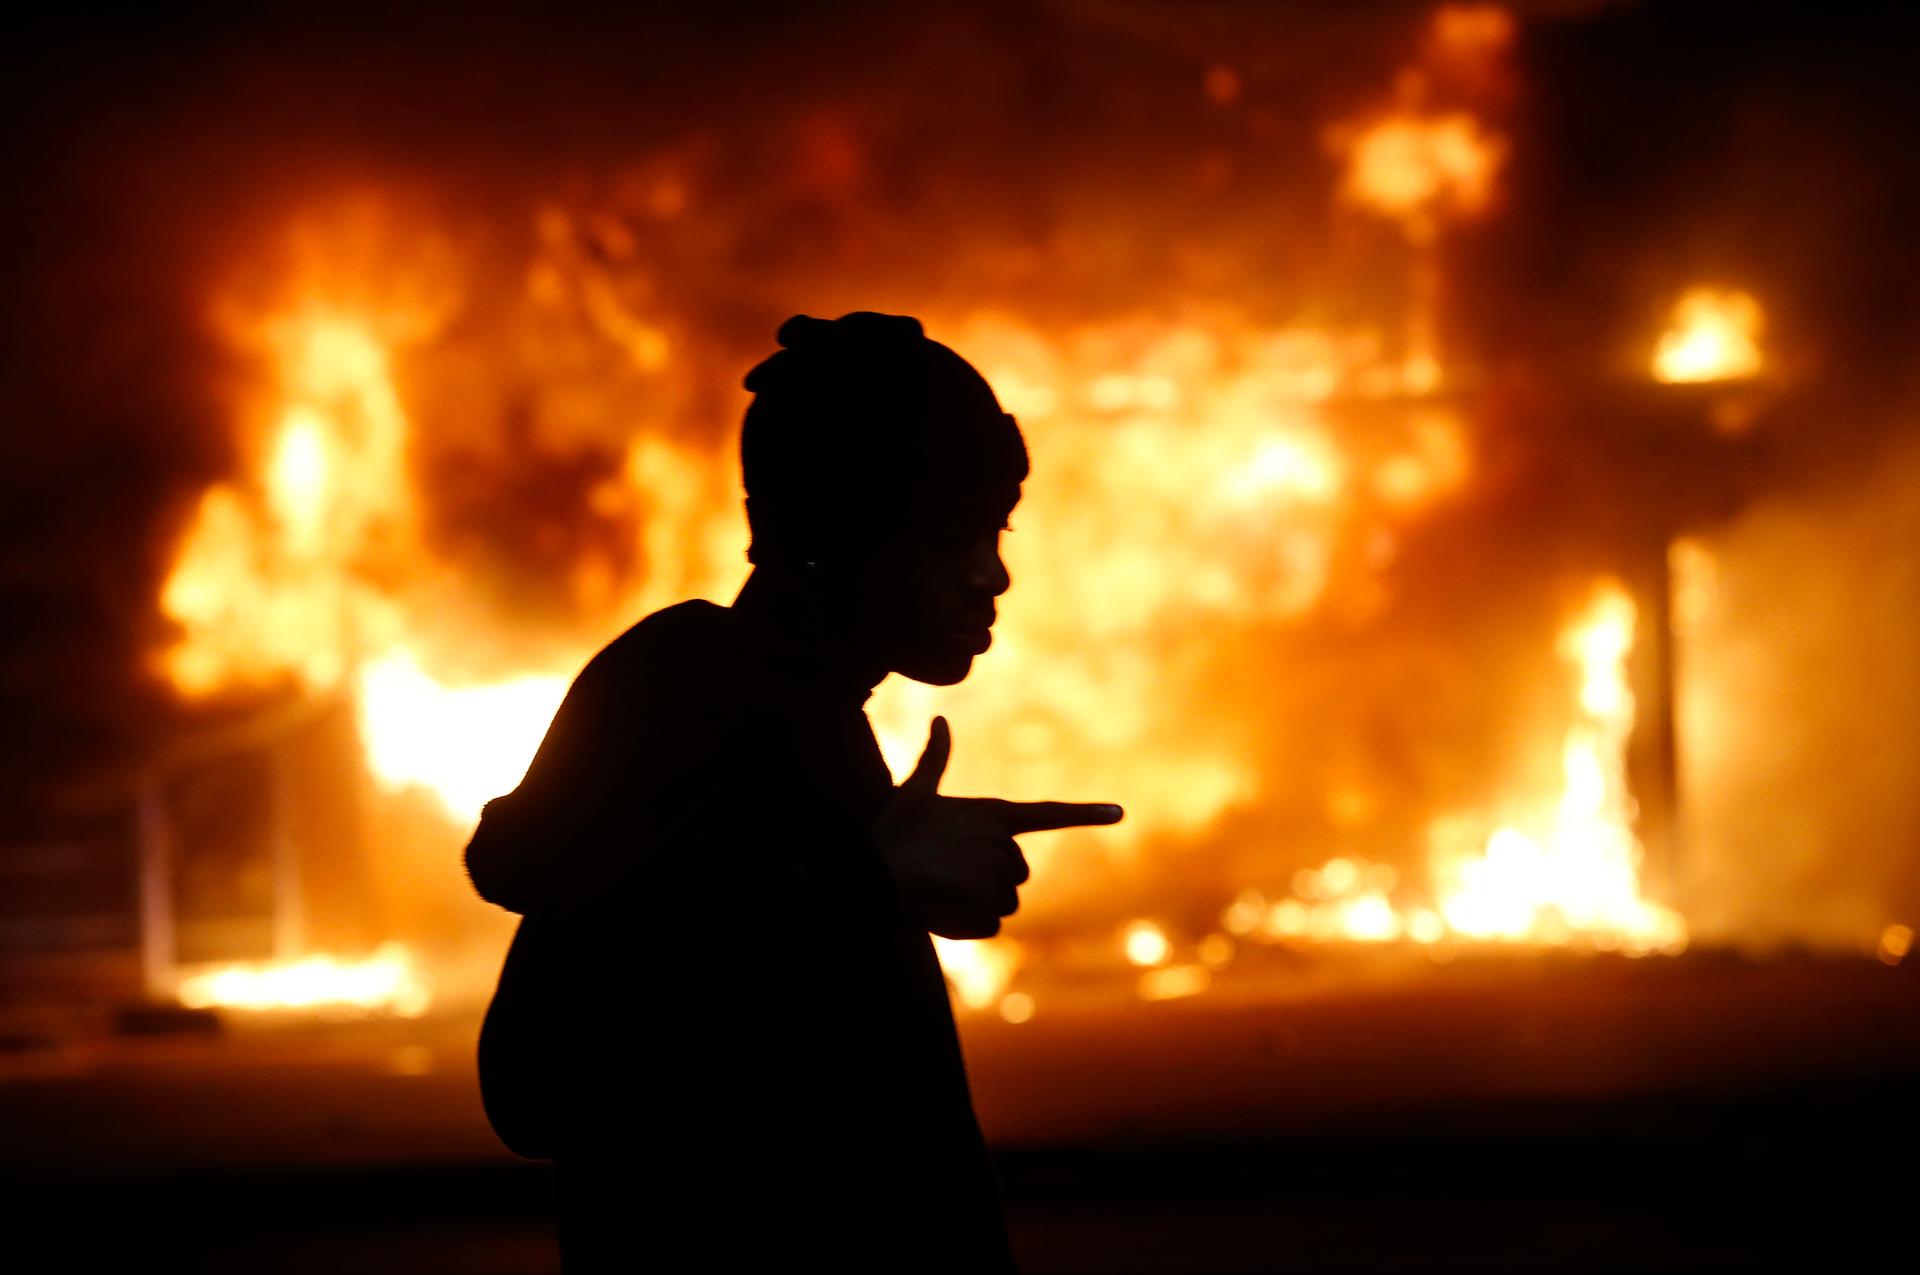 A man walks past a burning building during rioting after a grand jury returned no indictment in the shooting of Michael Brown in Ferguson, Missouri.